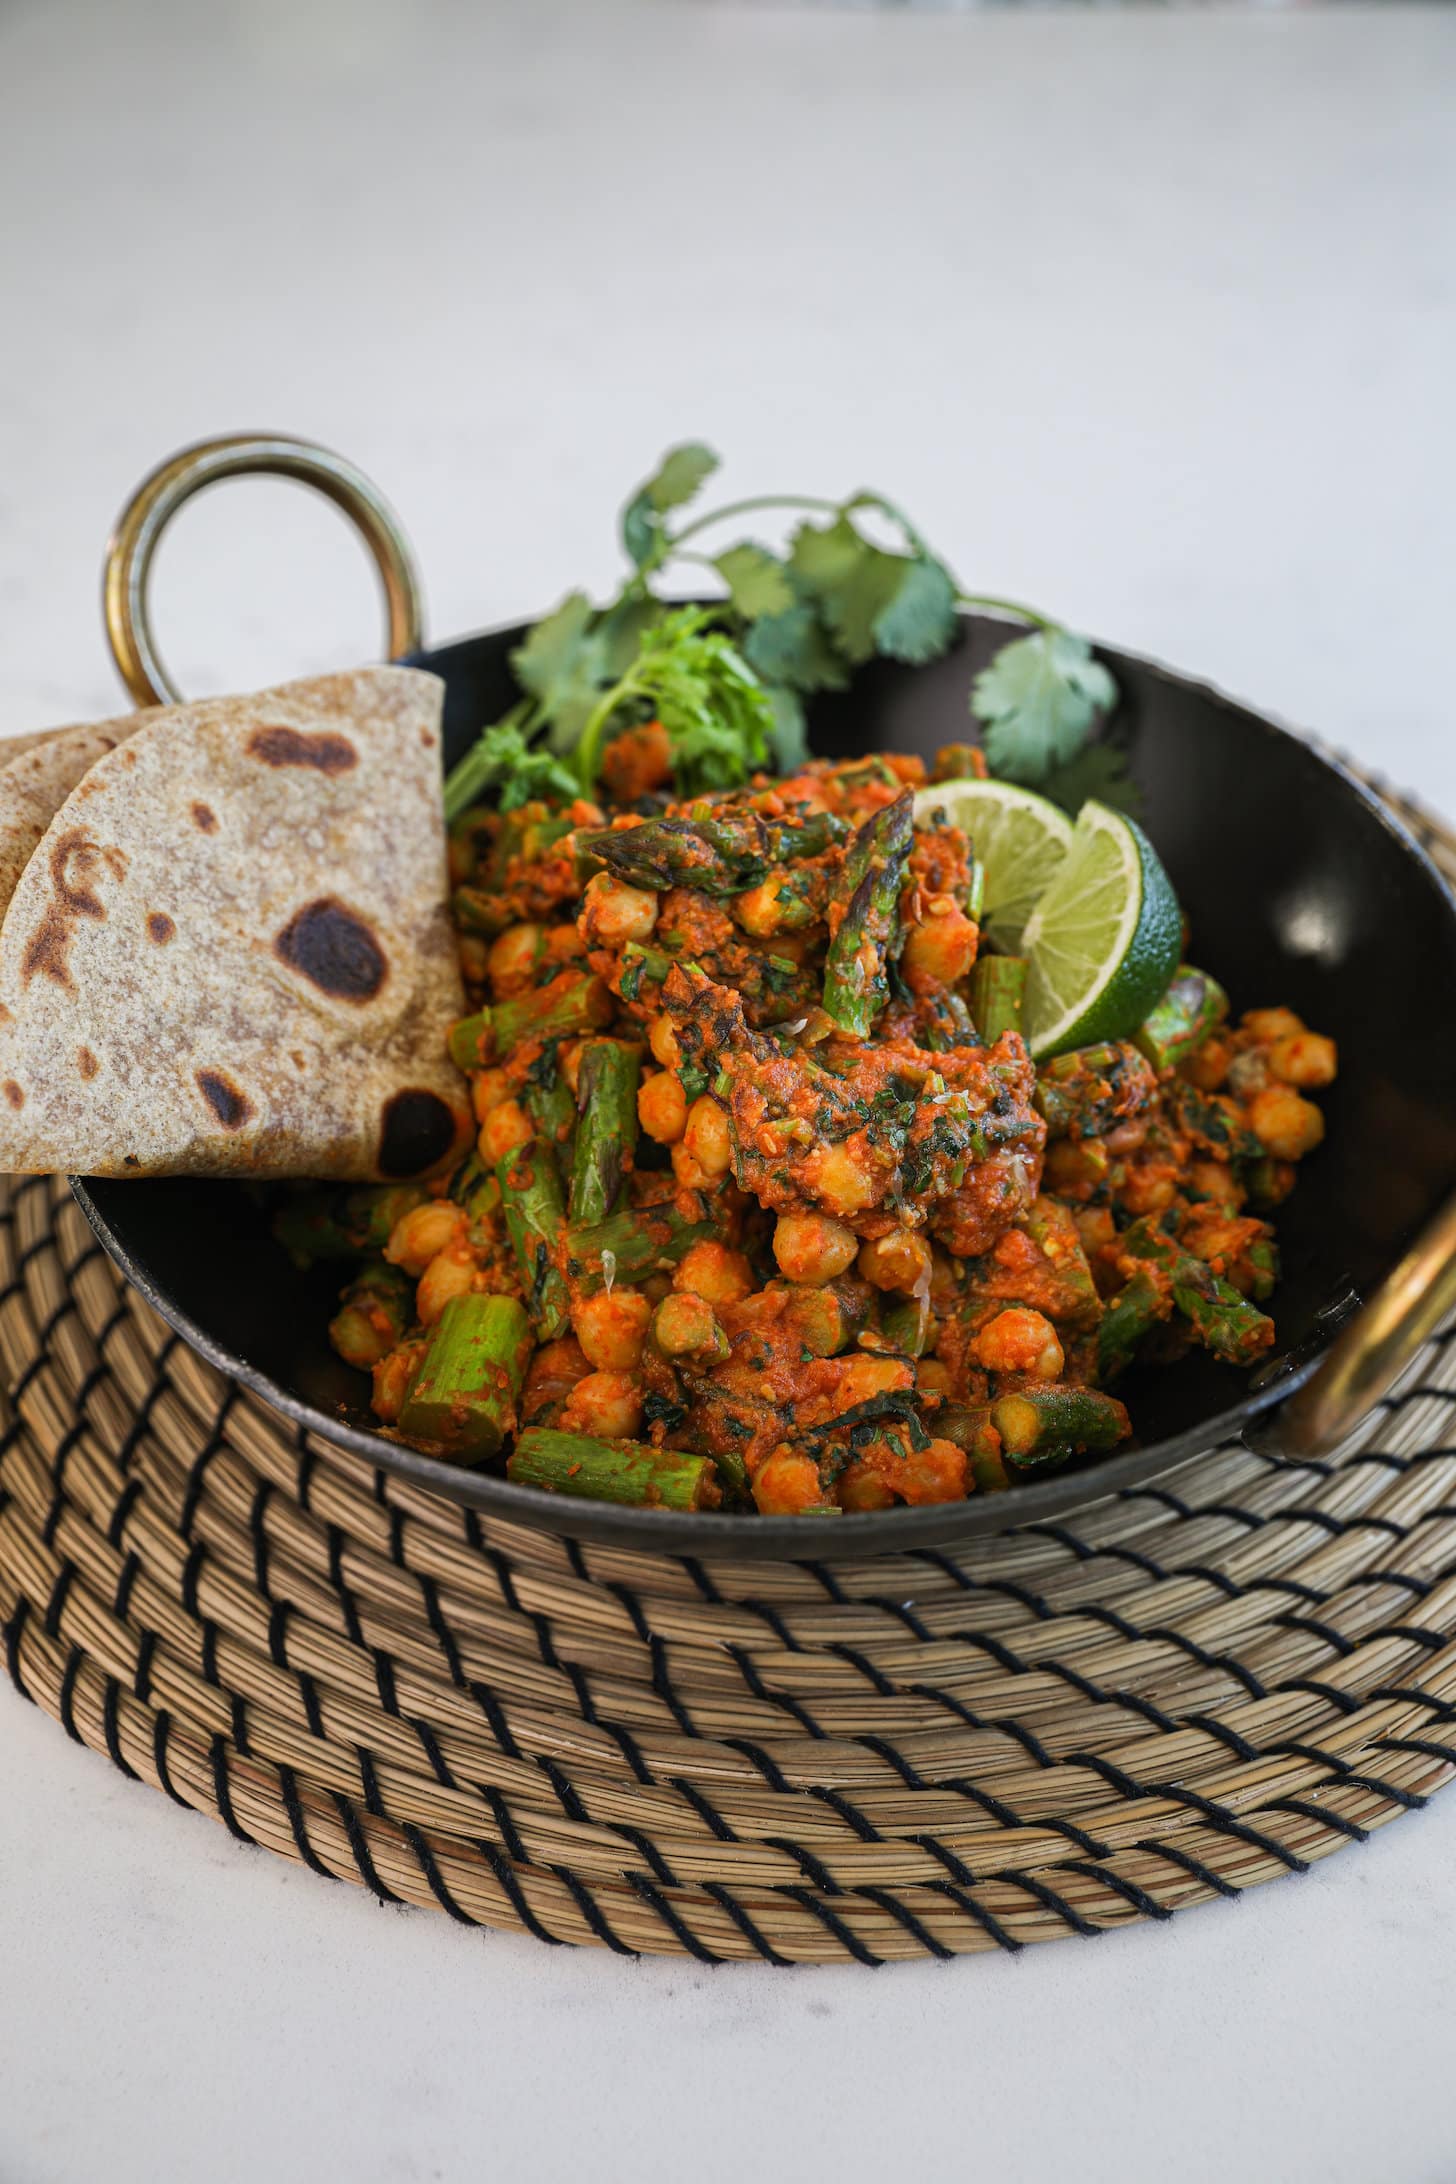 a wok filled with cooked chickpeas and asparagus in a orange/red sauce with a side of folded chapati.